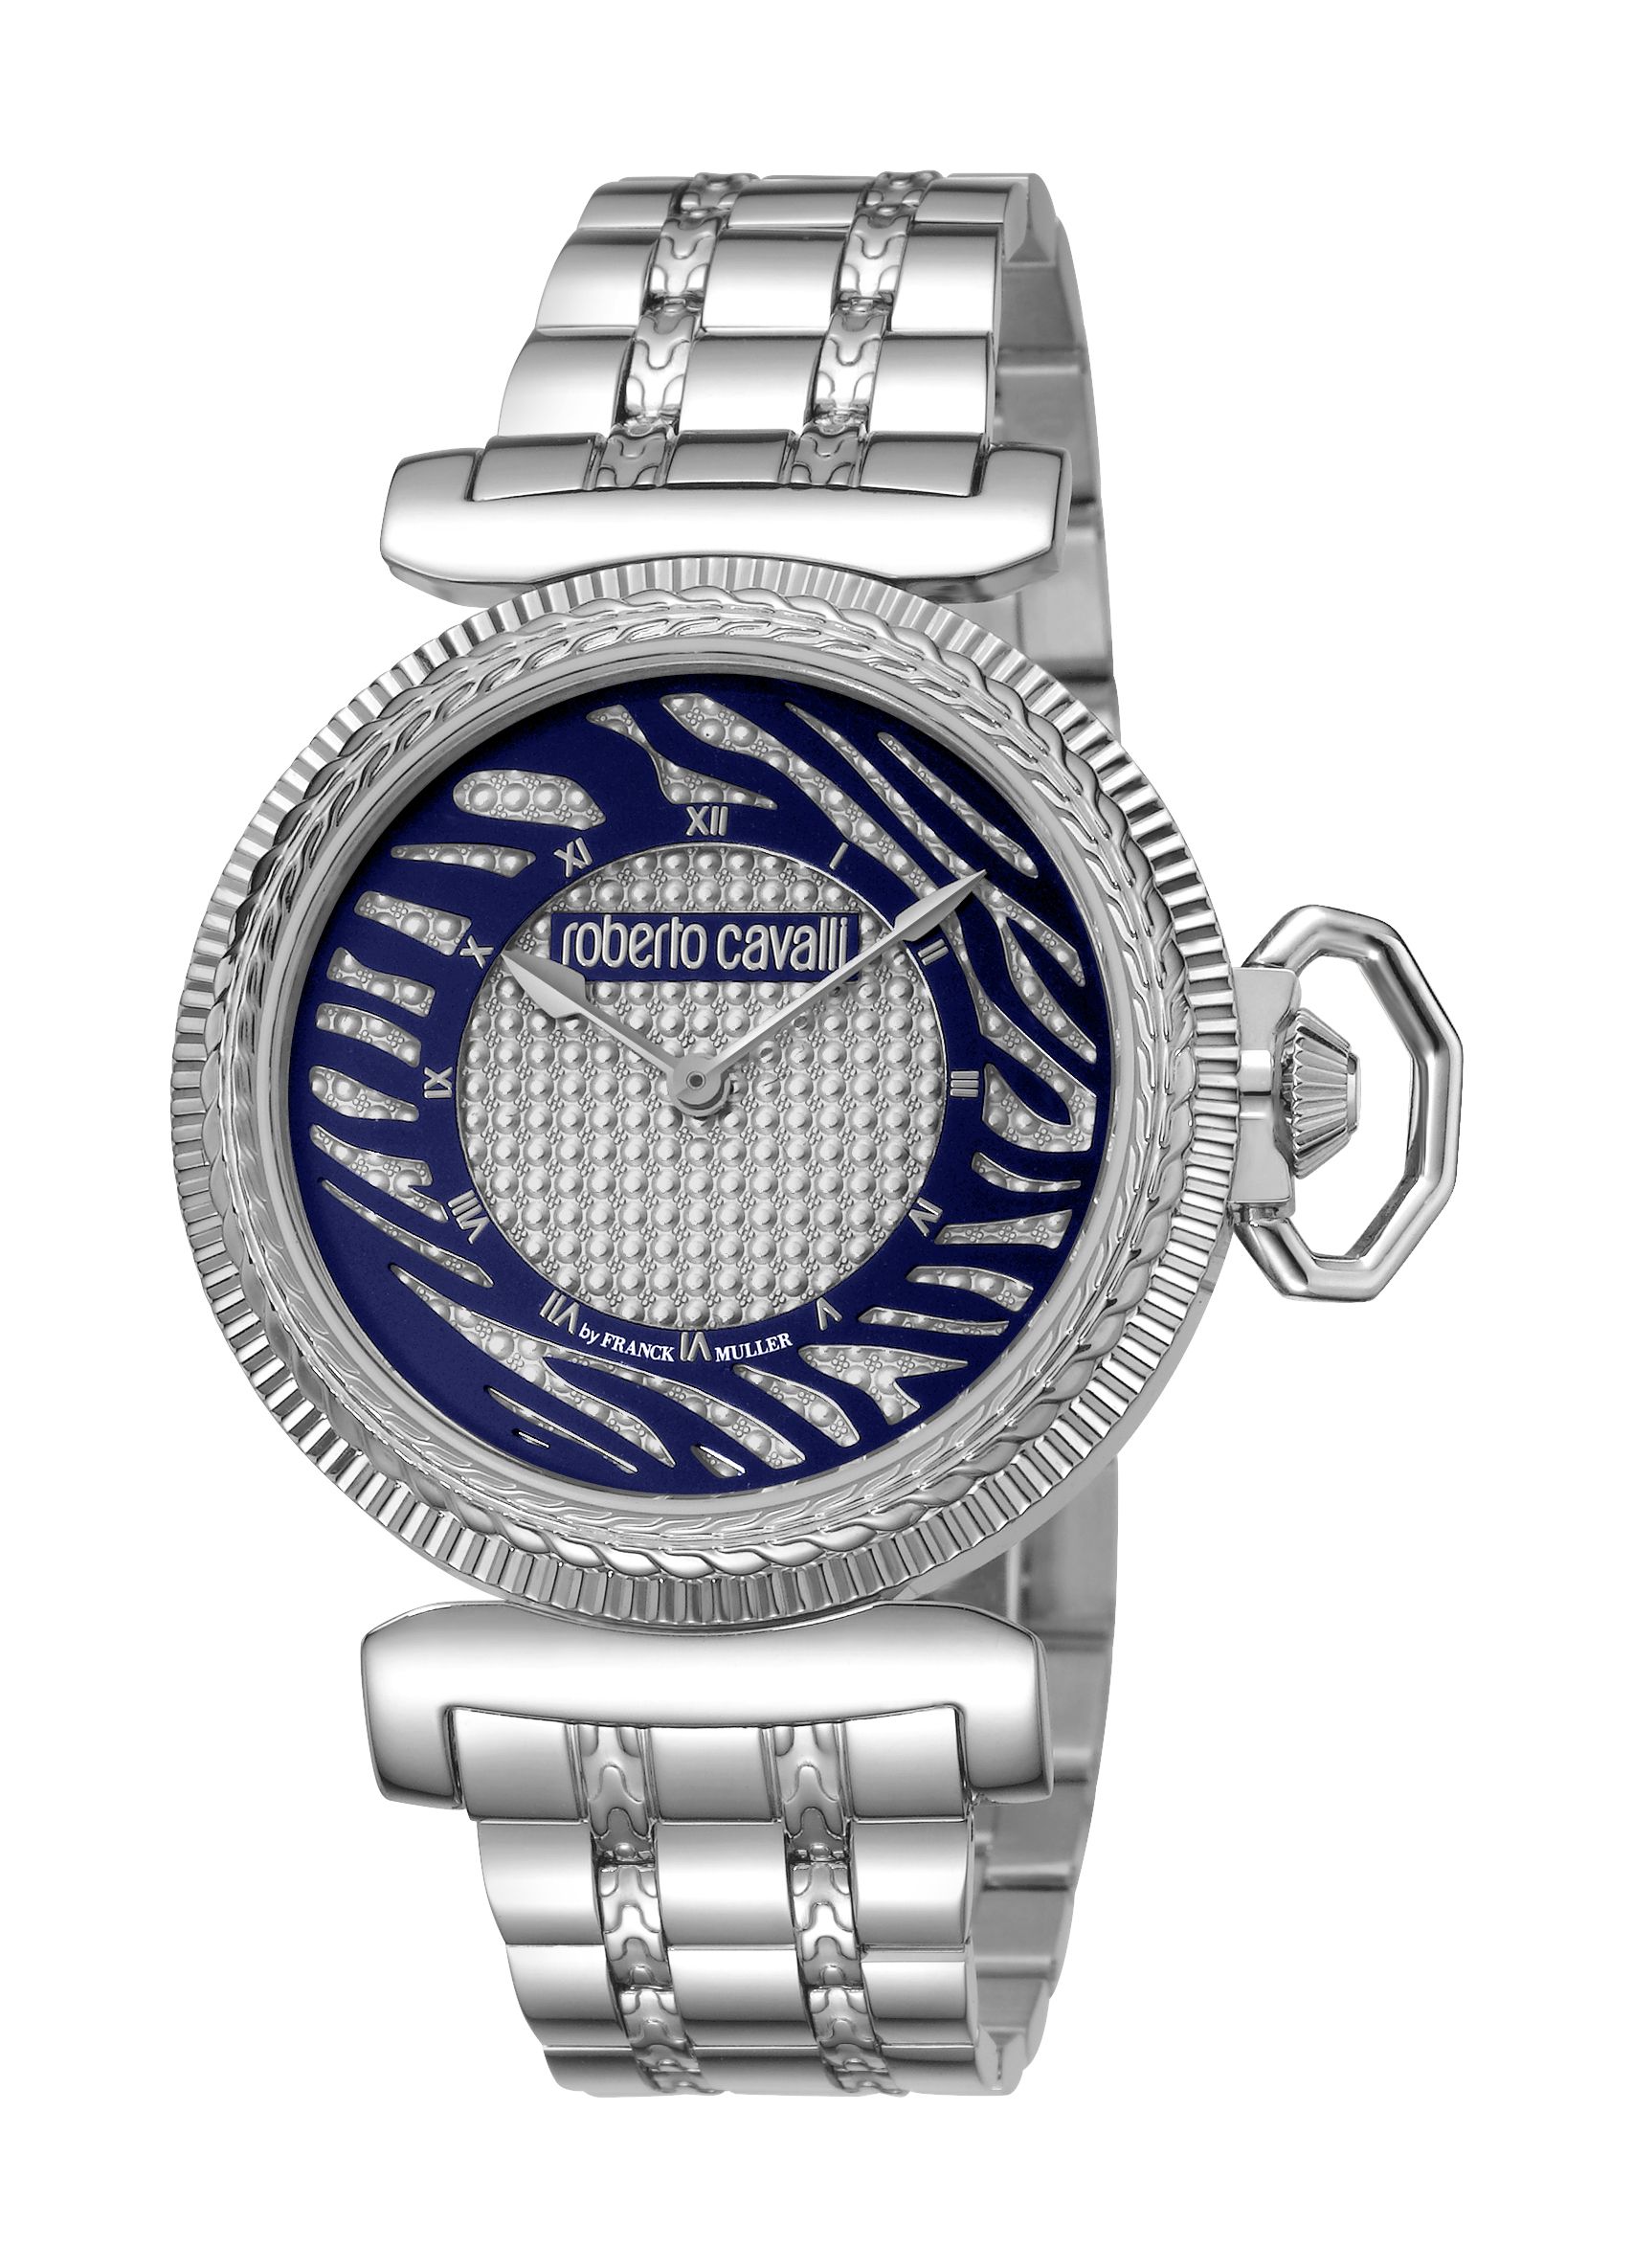 Roberto Cavalli by Franck Muller bracelet watch. 38mm round stainless steel case and hardware. Five-link bracelet strap with deployant closure. Fluted trim details outer bezel and case back. Chain motif details links and inner bezel. Dotted dial with zebra cutouts in blue. Logo text and Roman numeral indices. Two-hand Ronda 762 movement. Antireflective sapphire crystal. Water resistant to 5 ATM.